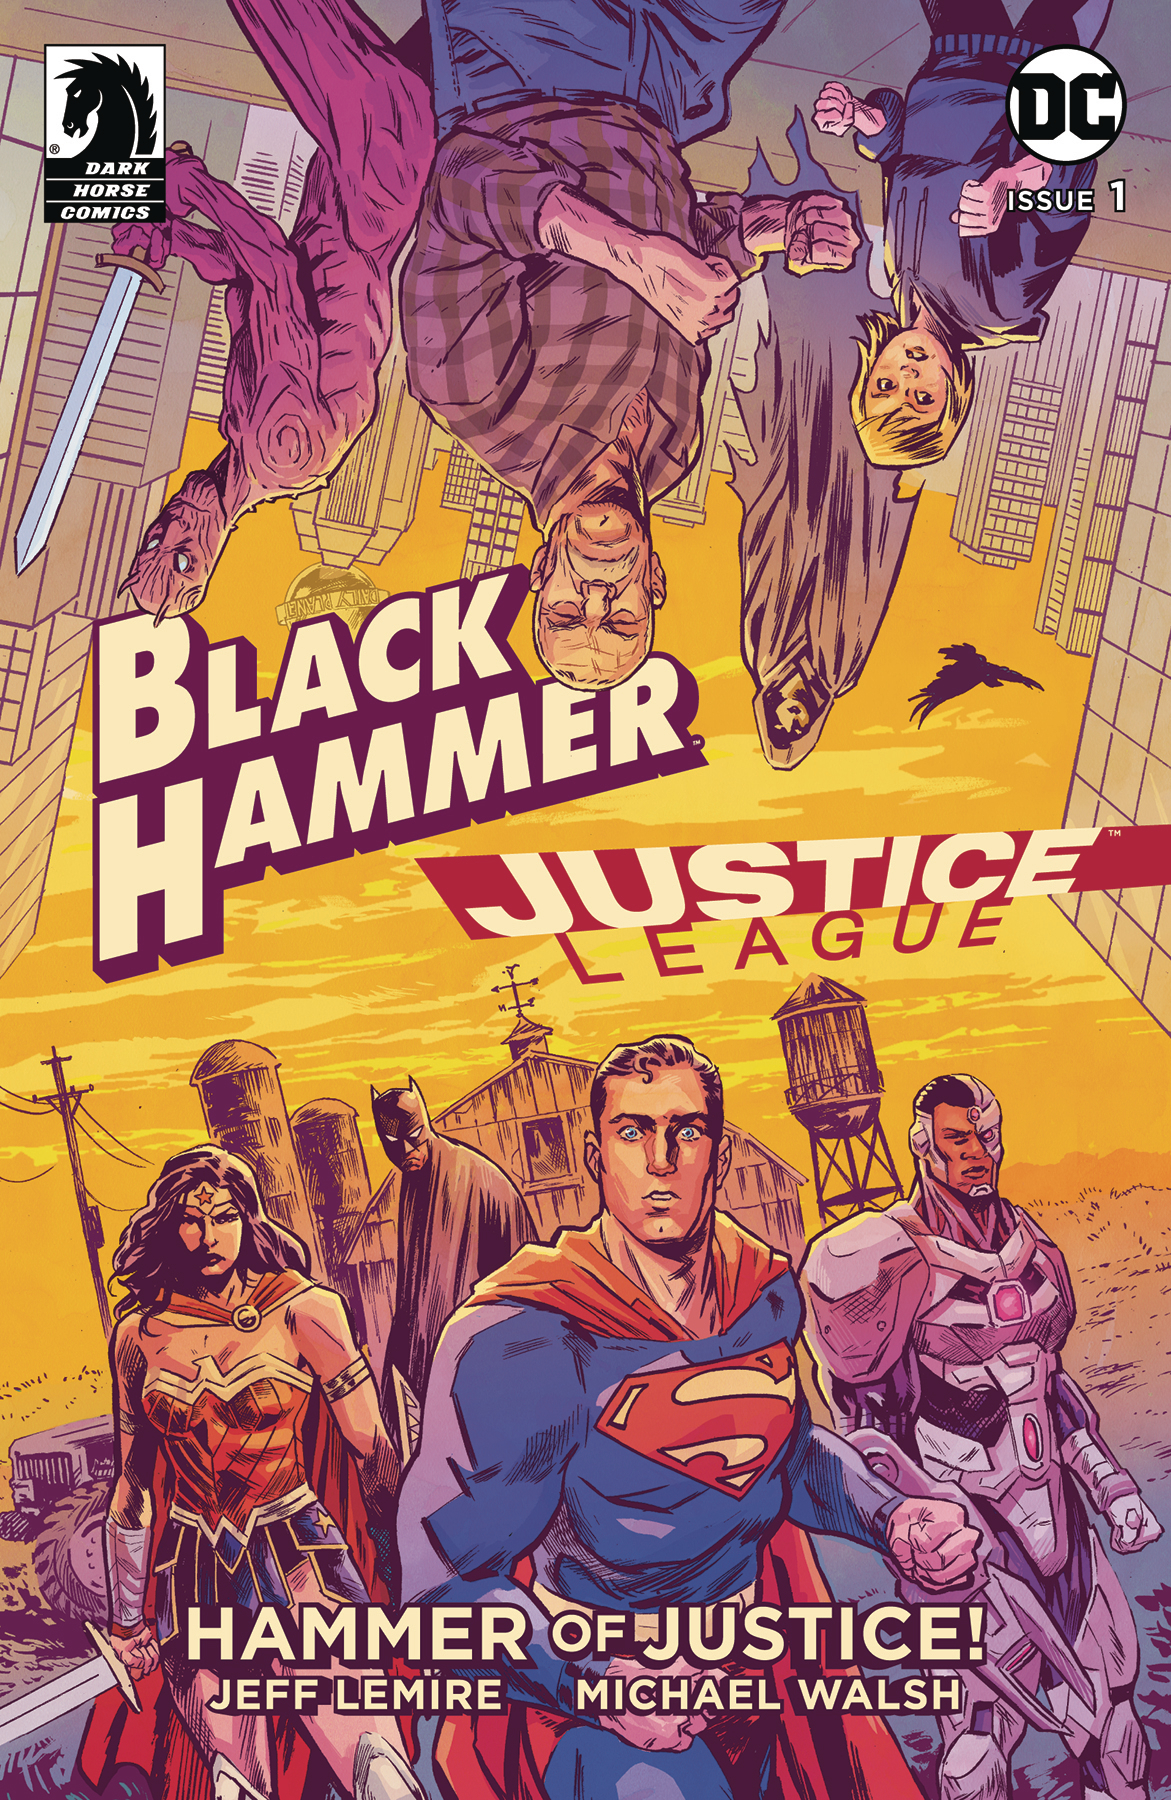 Black Hammer Justice League no. 1 (1 of 5) (2019 Series)